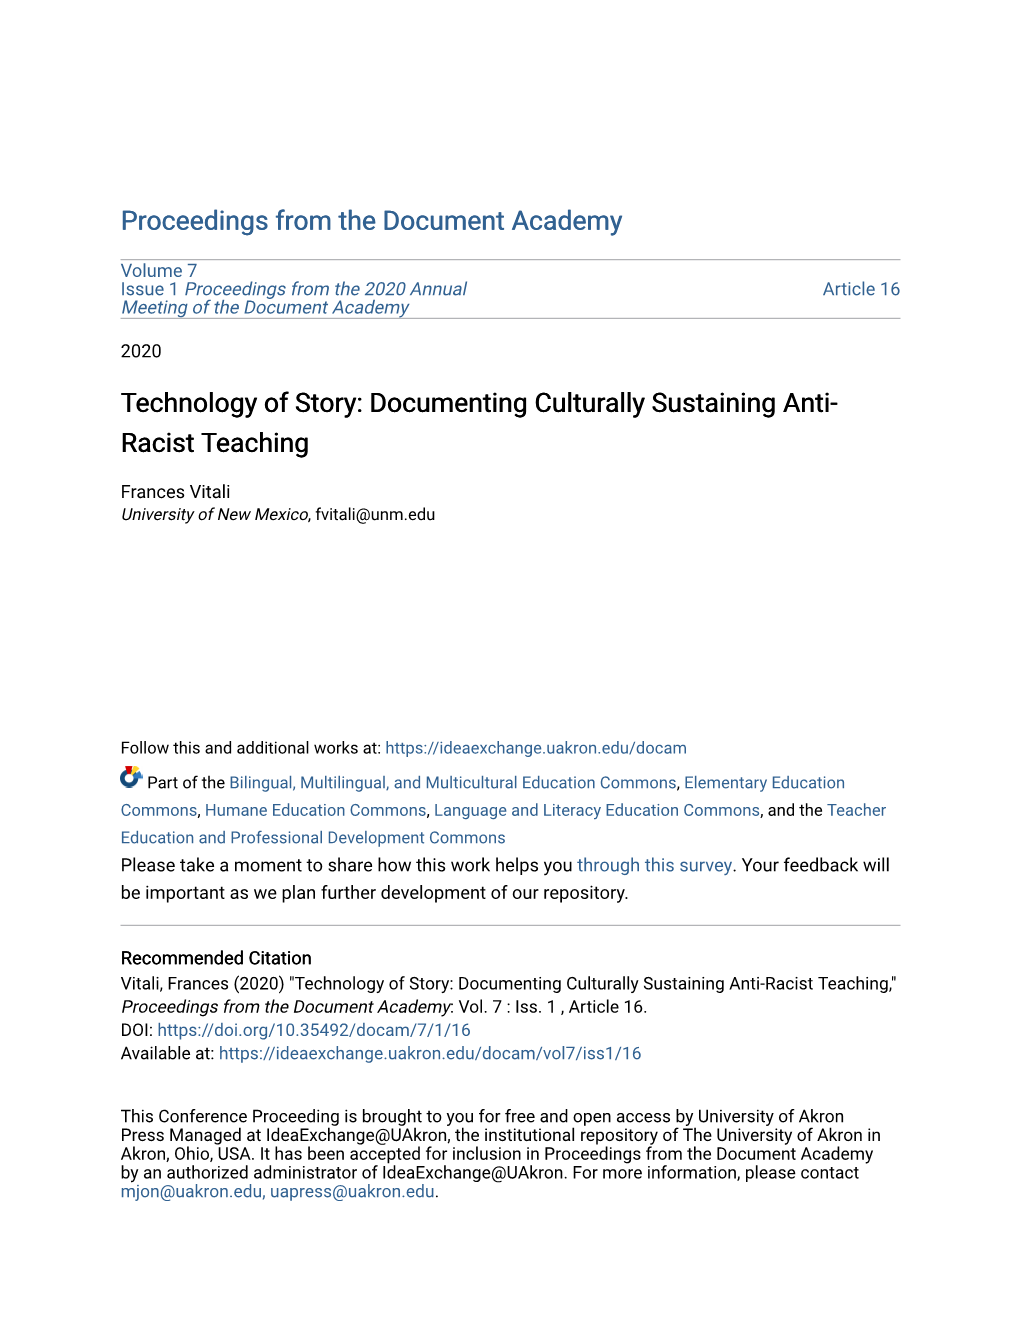 Documenting Culturally Sustaining Anti-Racist Teaching," Proceedings from the Document Academy: Vol